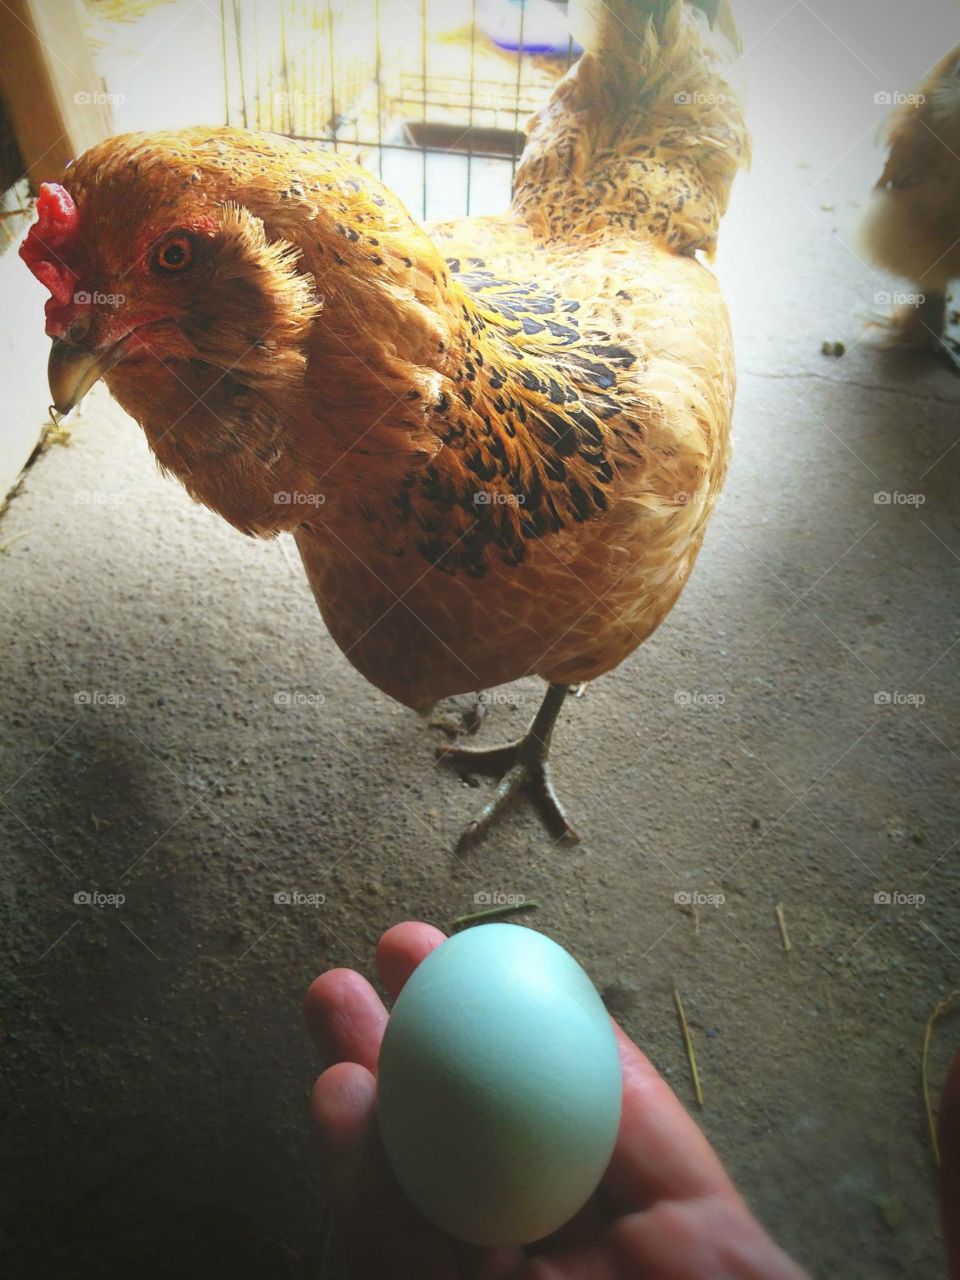 Thank you for the egg.